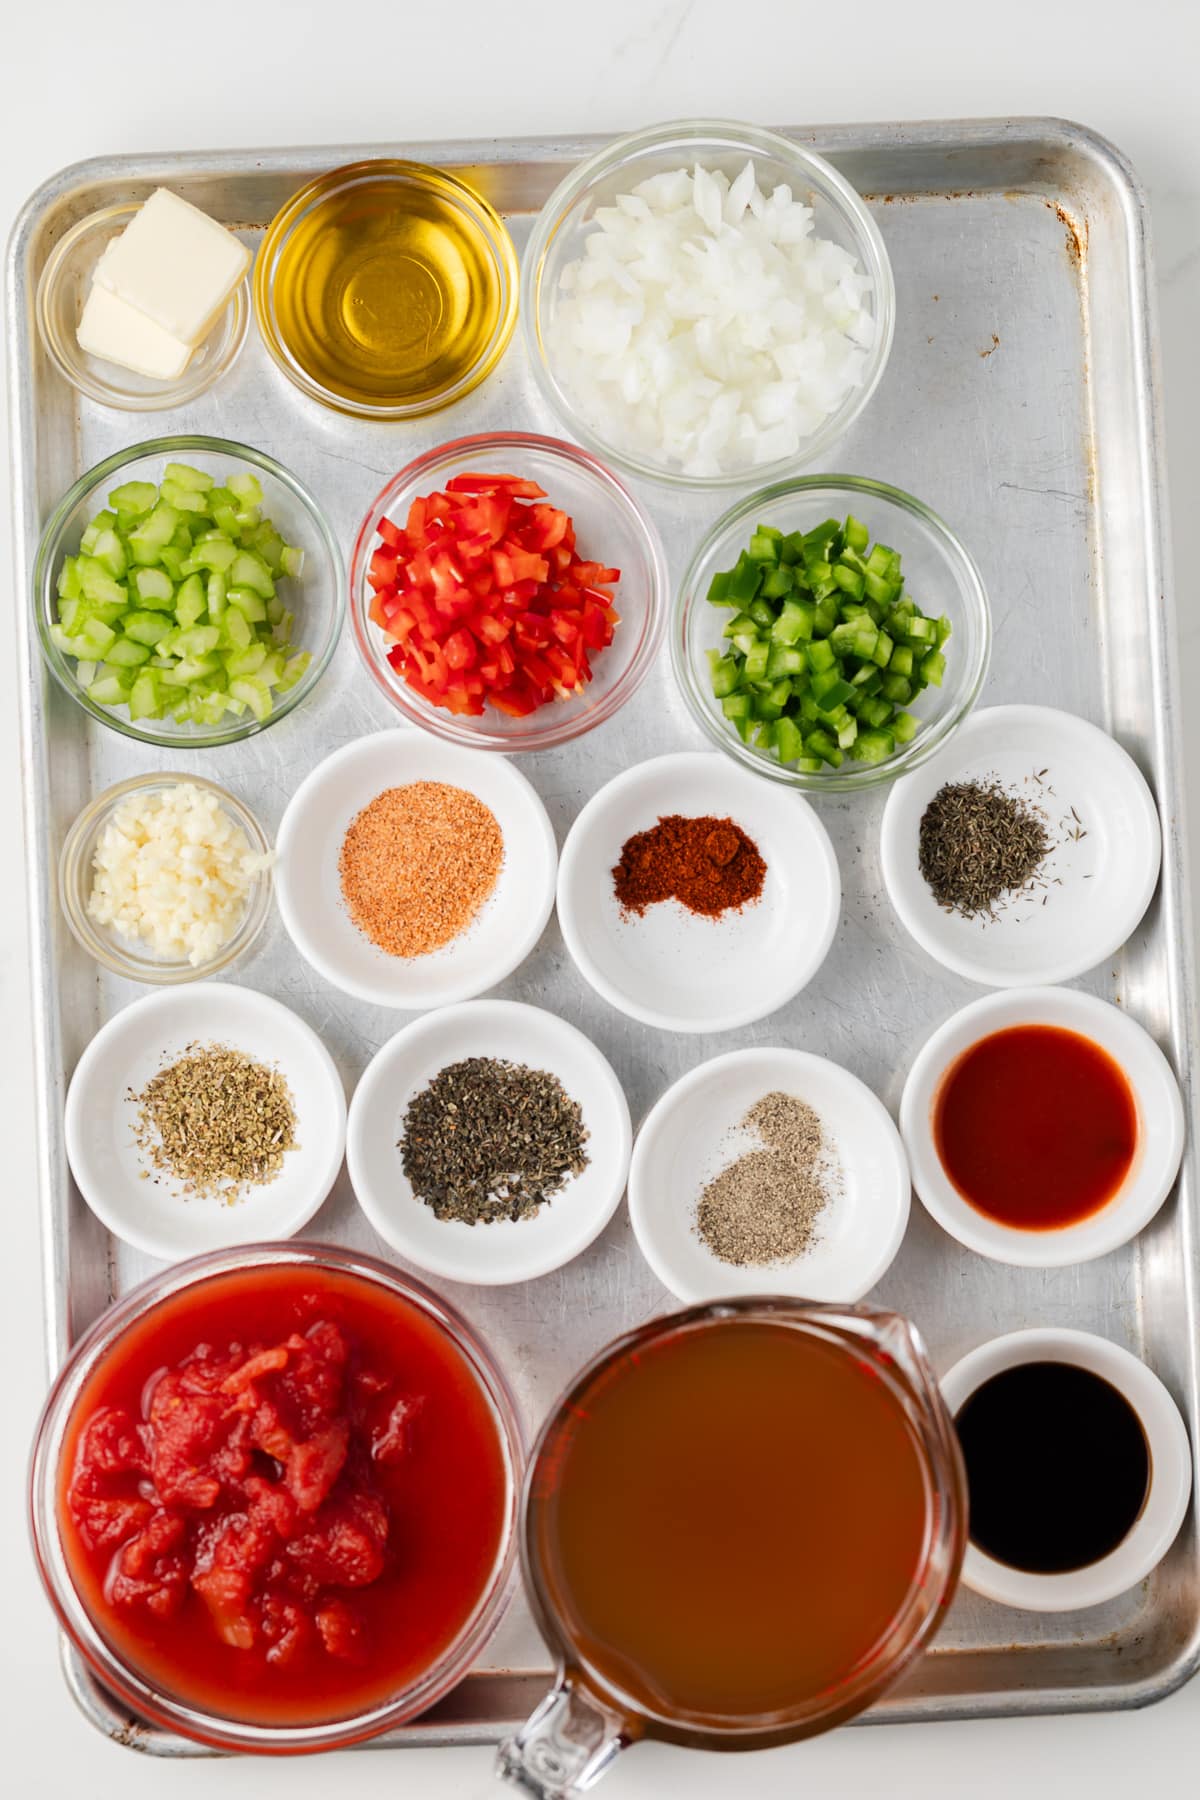 Ingredients for creole sauce.